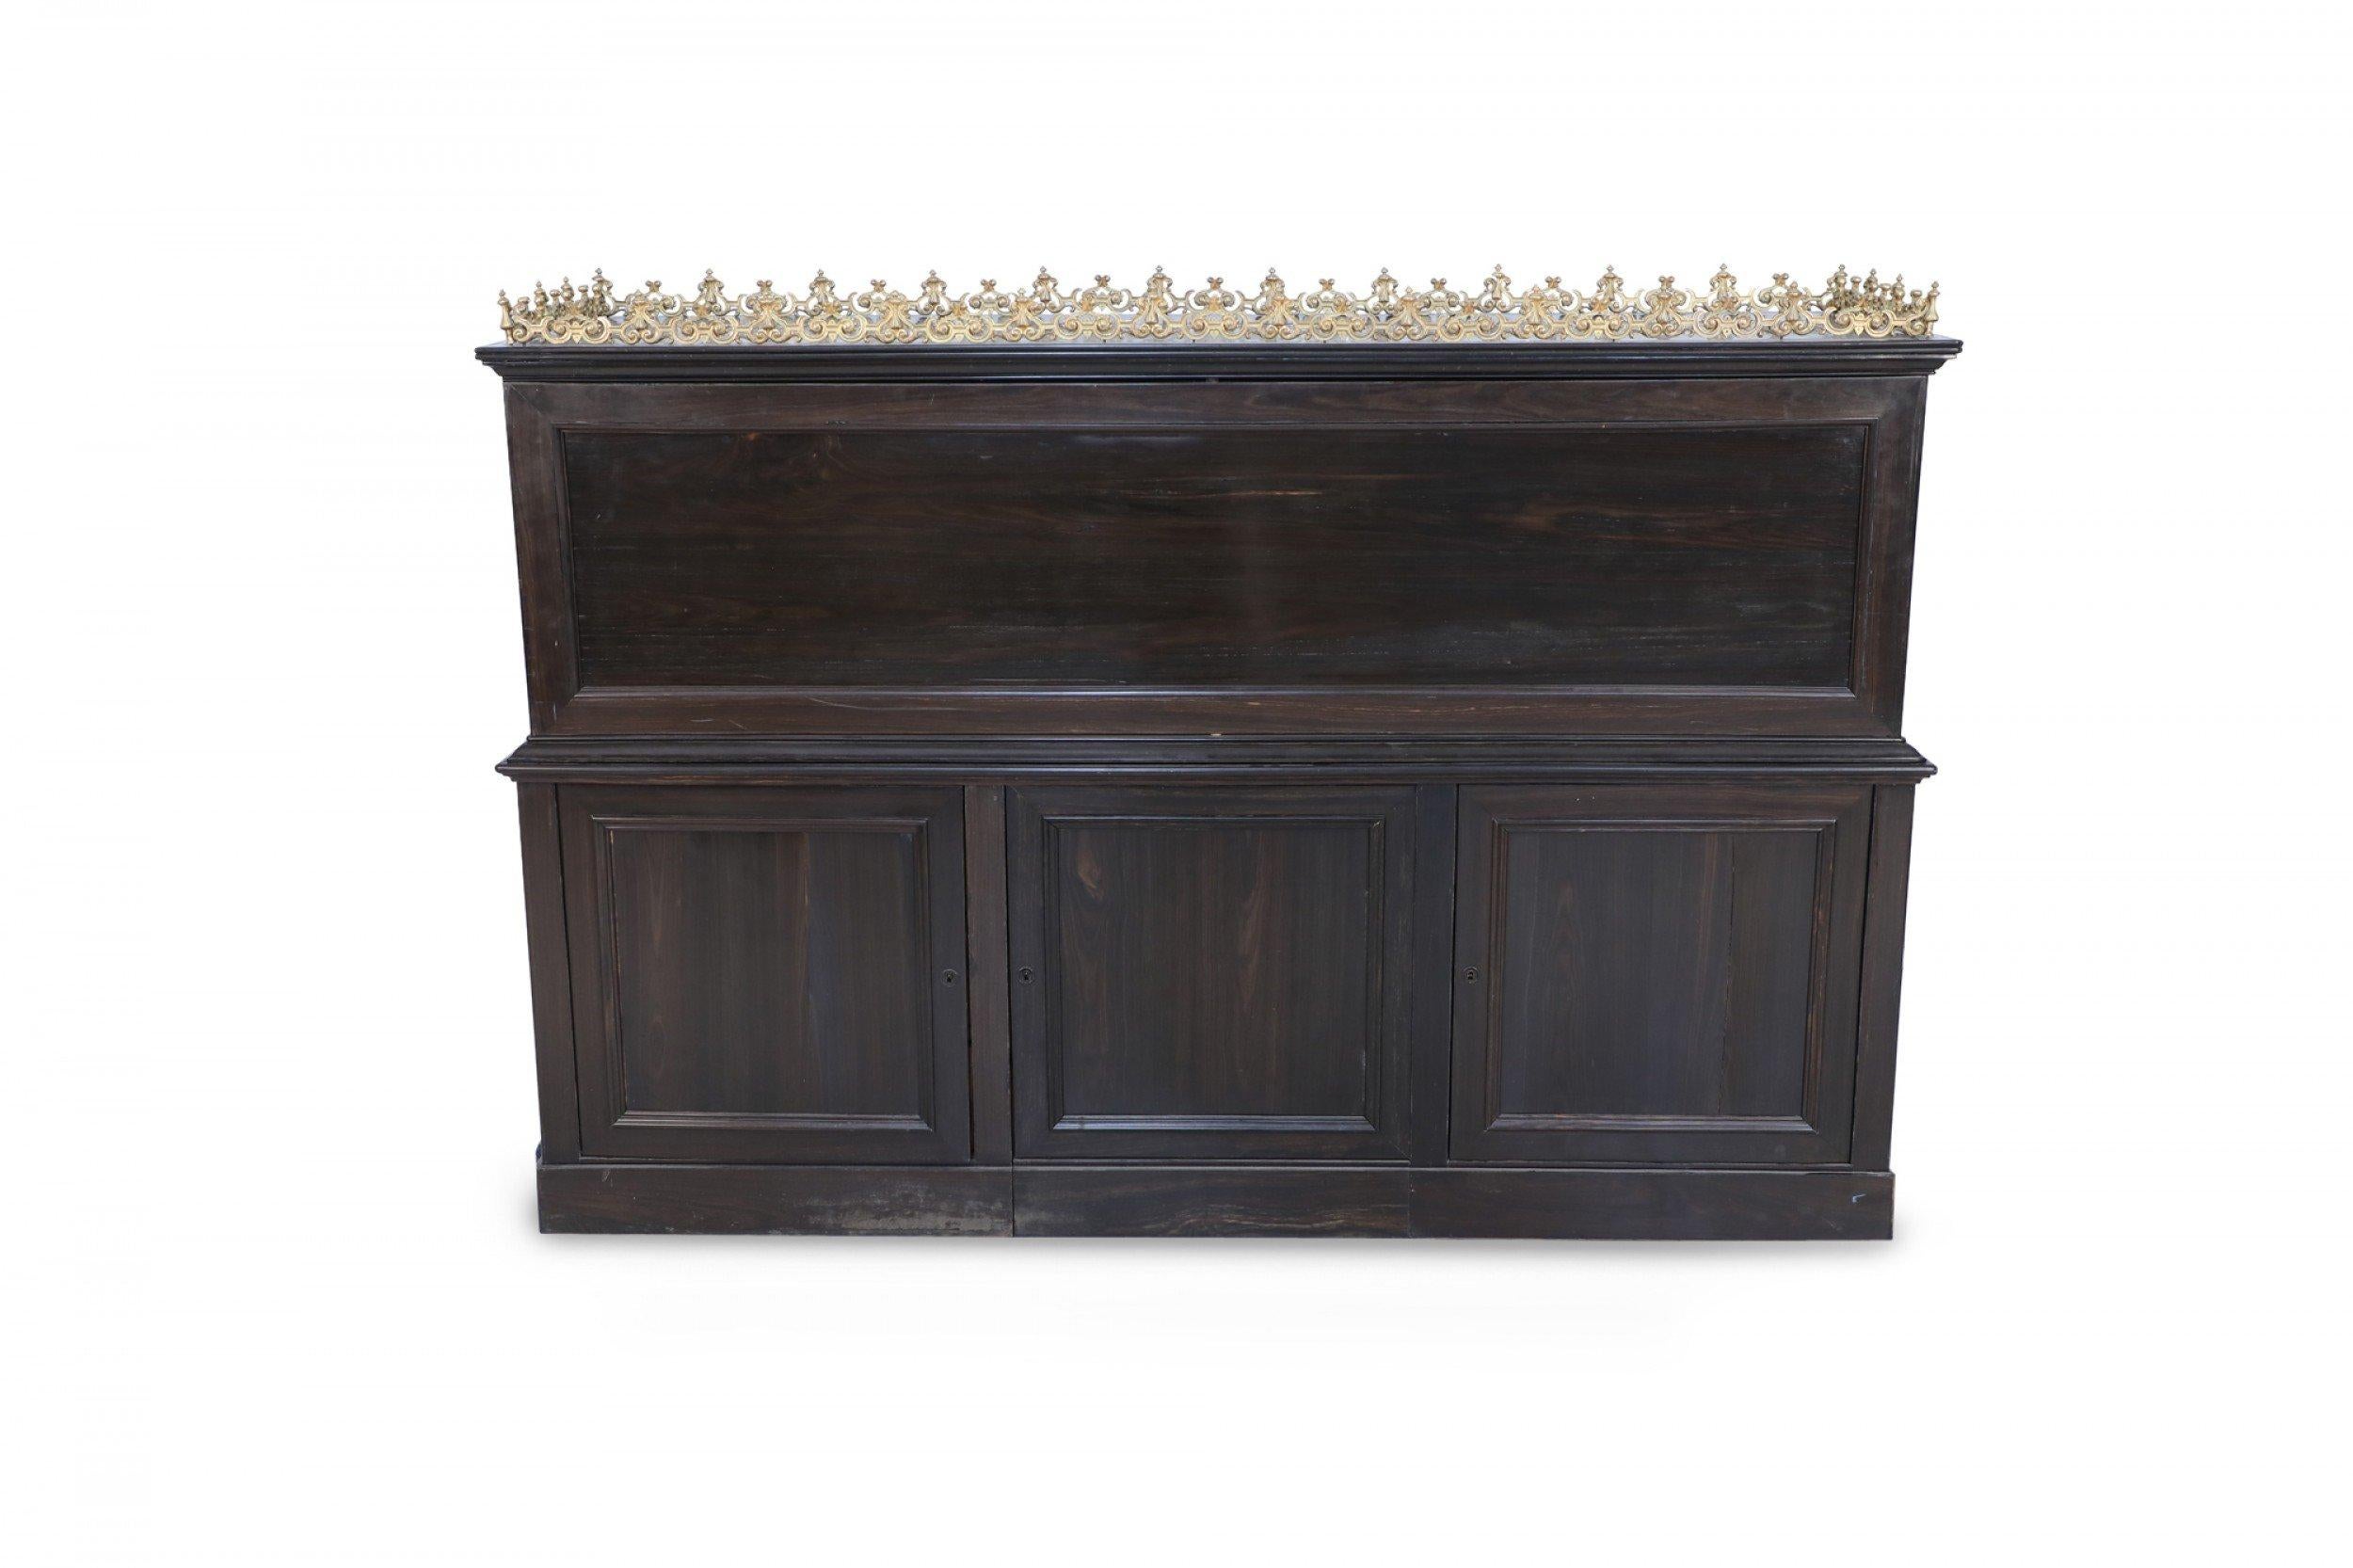 Victorian English Mahogany and Gold Accented Roll Top Desk For Sale